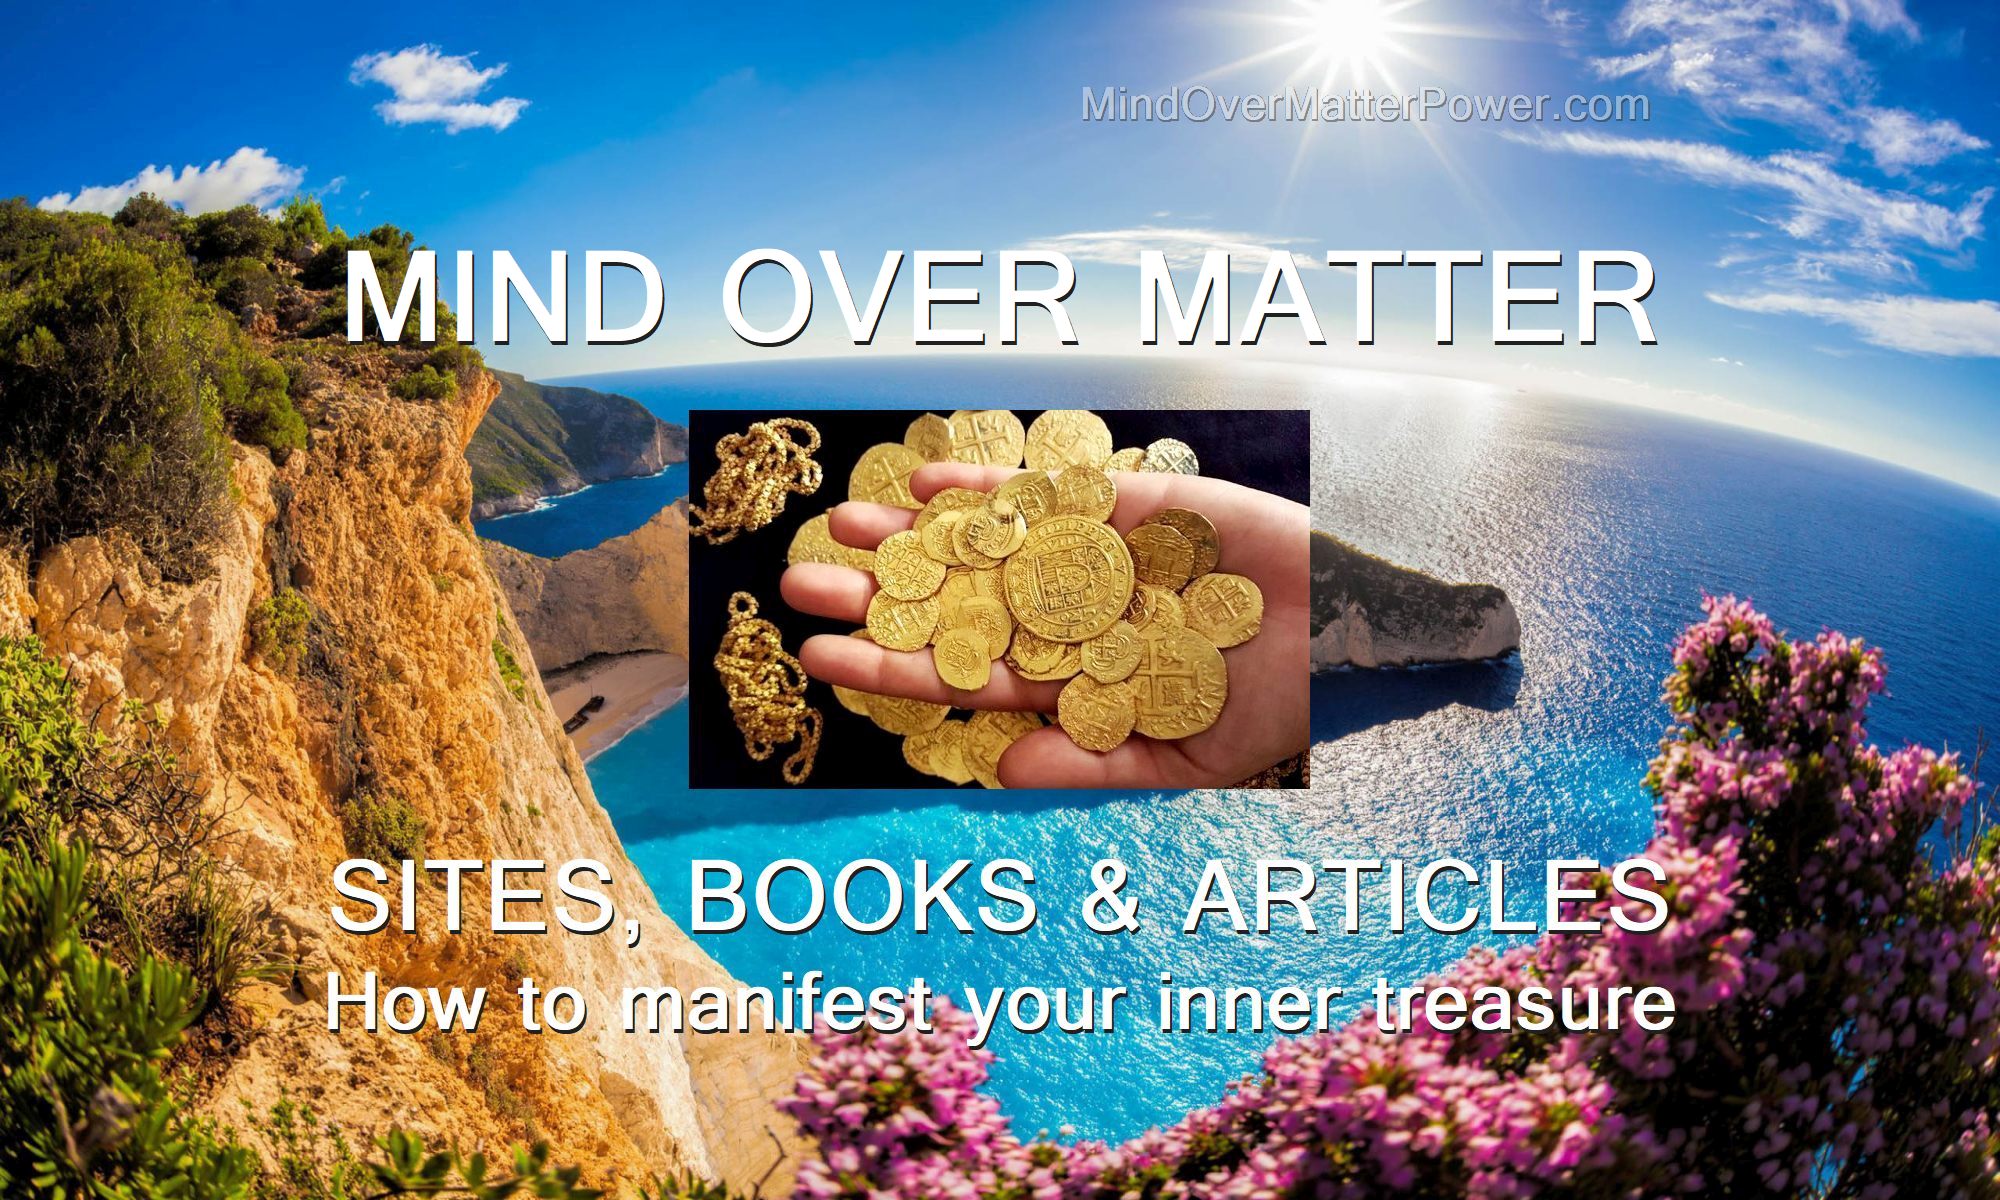 Metaphysical-philosophy-books-Mind-Over-Matter-Books-Metaphysics-Personal-Growth-Transformation-Self-Improvement-new-age